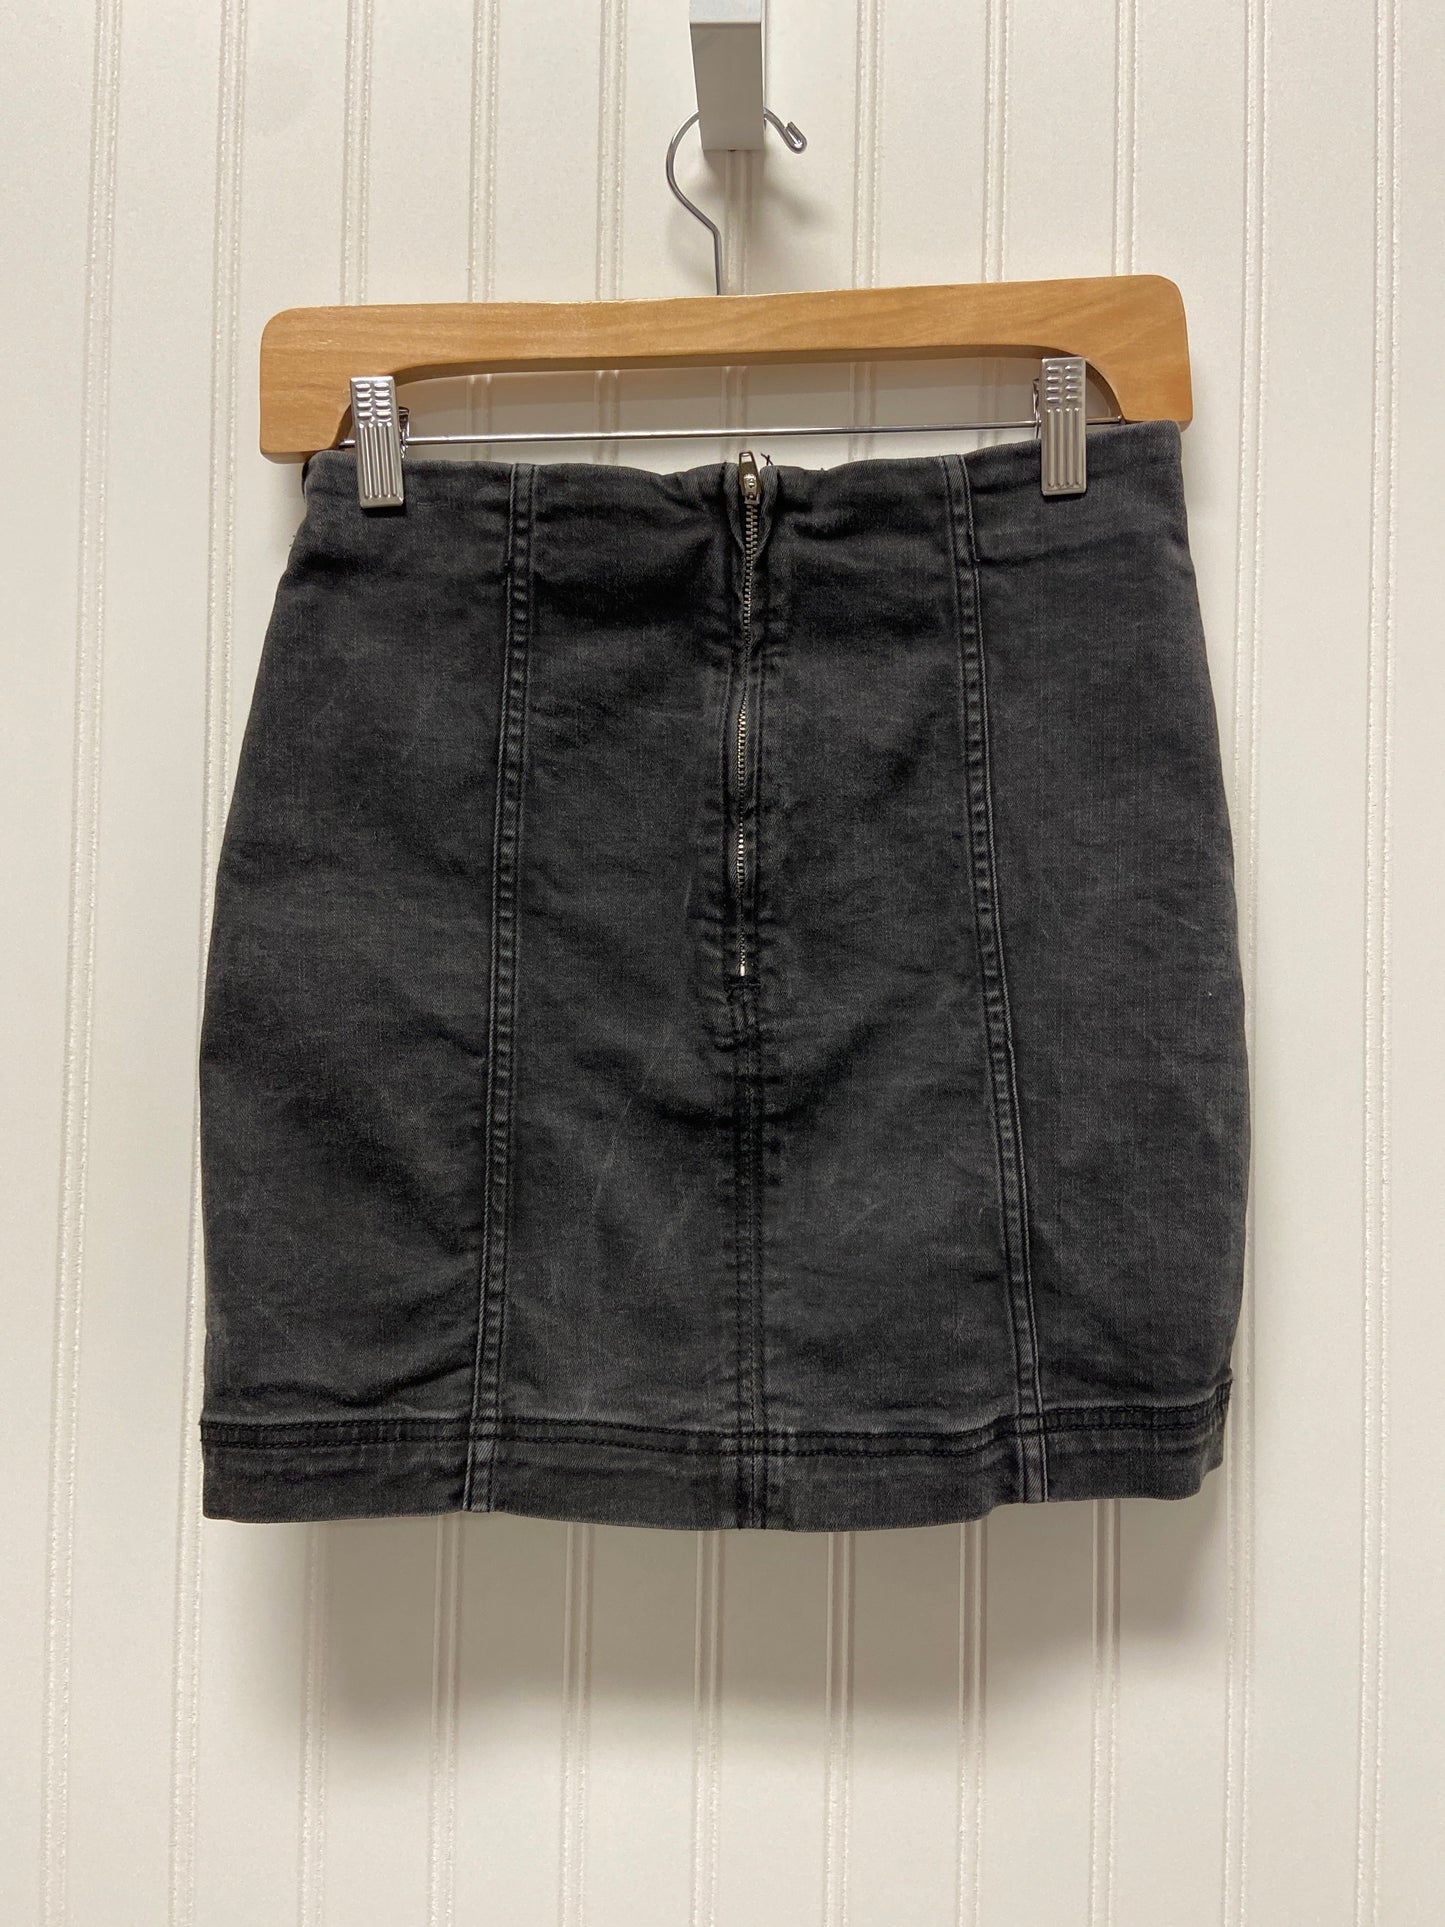 Skirt Mini & Short By Free People  Size: 4